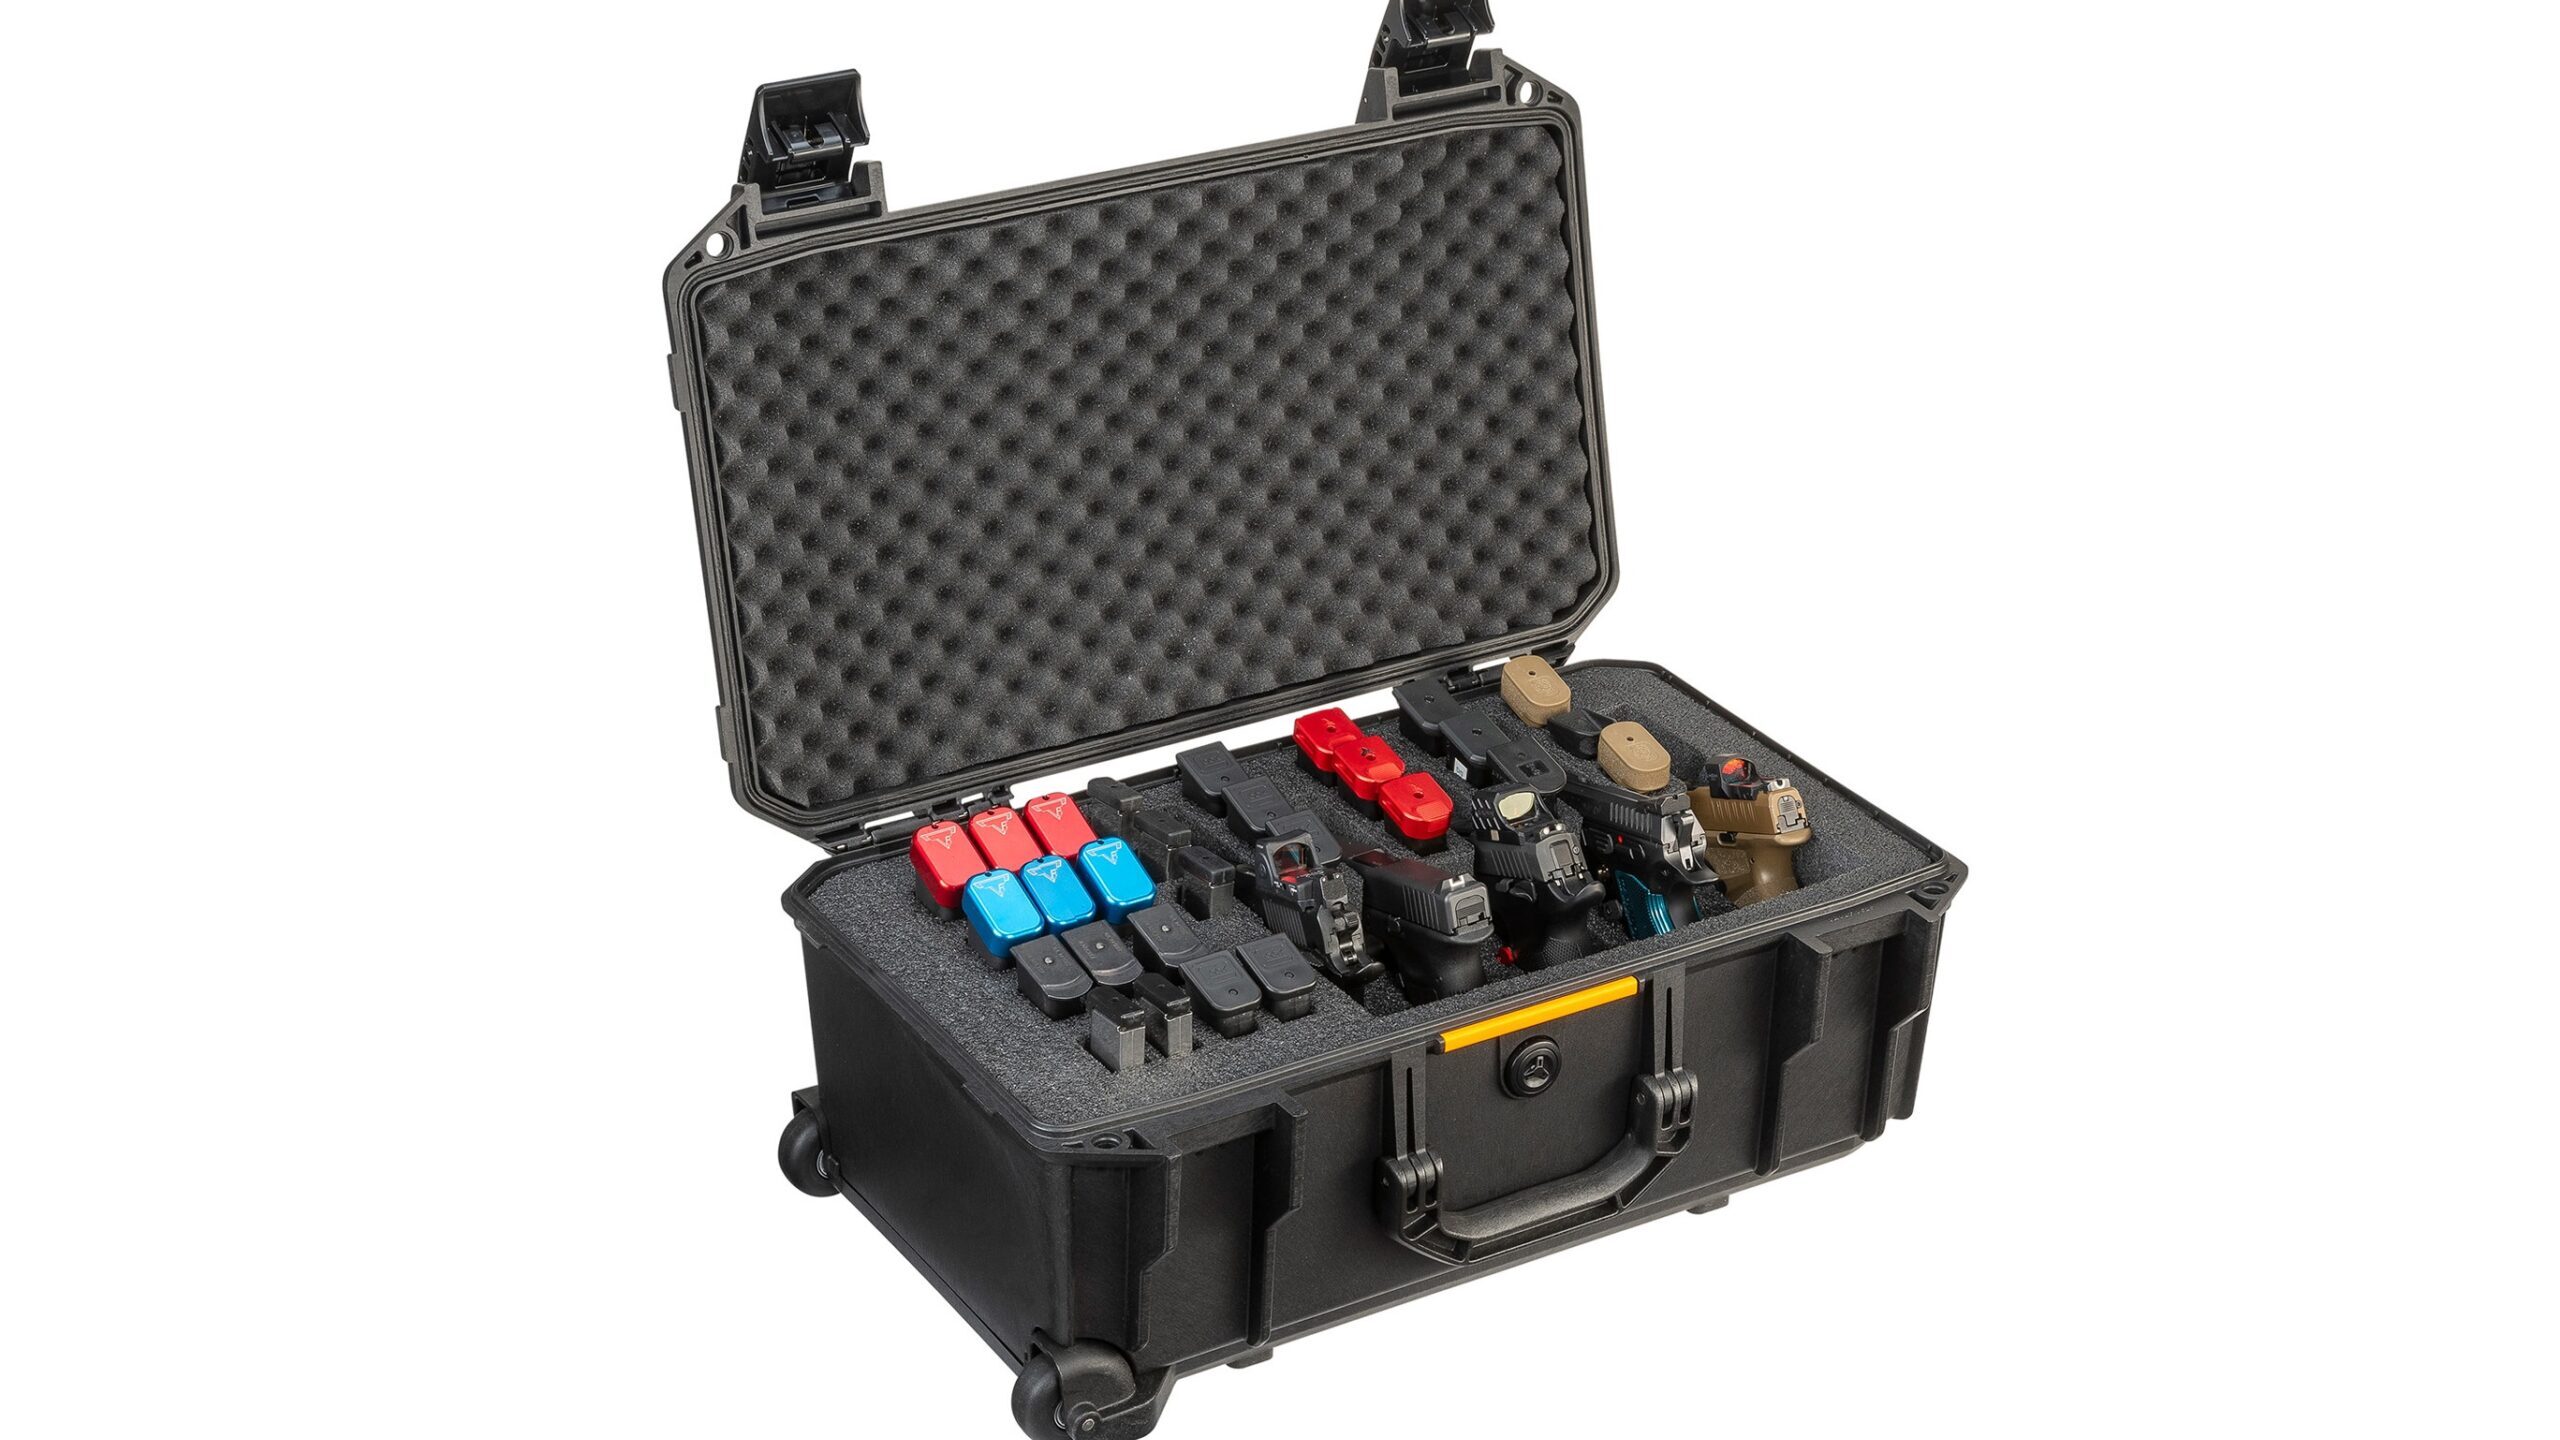 The New Pelican V100P and V525P Vault Pistol Cases